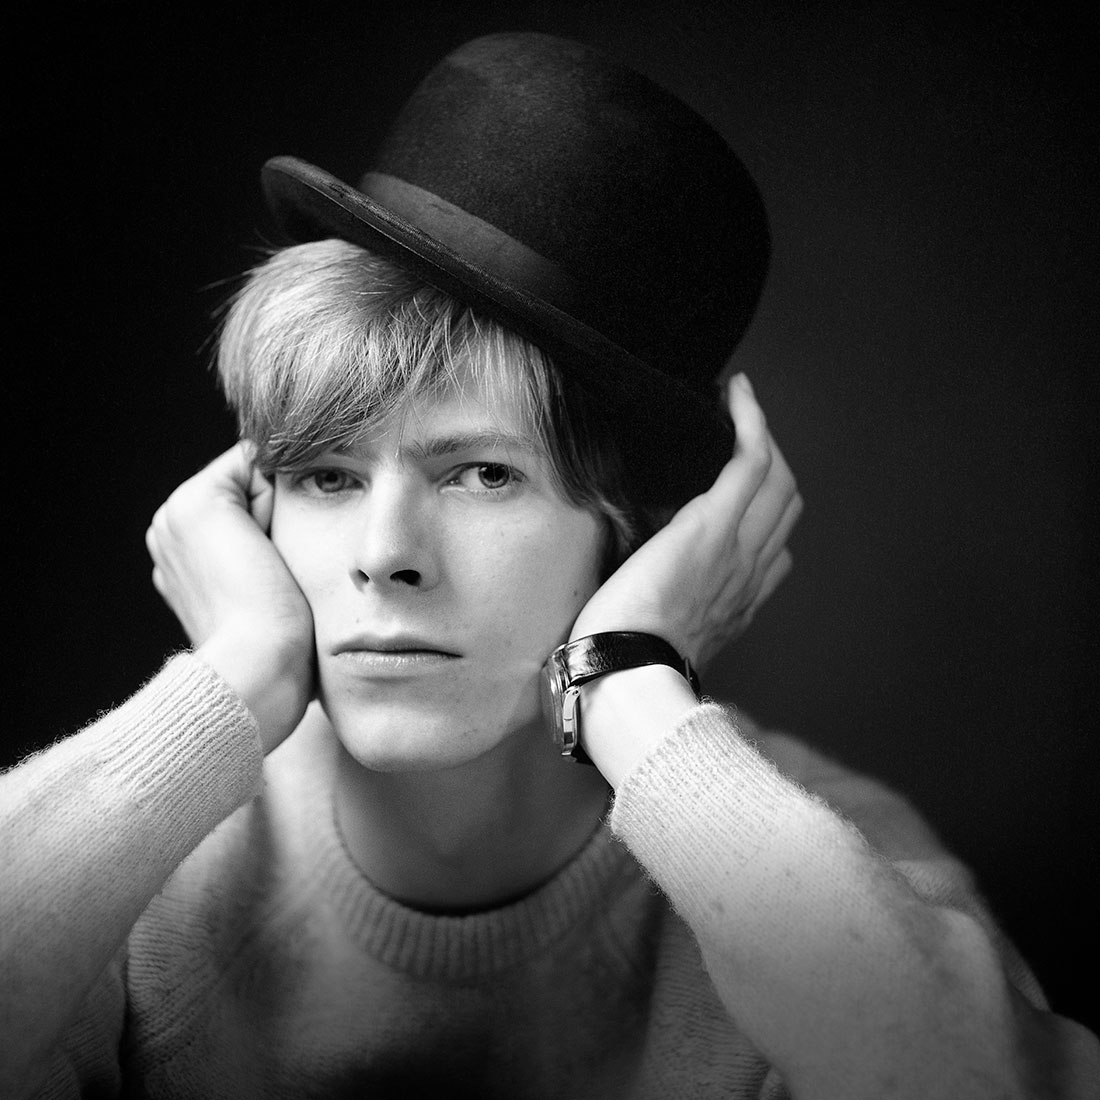 Baby-faced Bowie, before he became a star